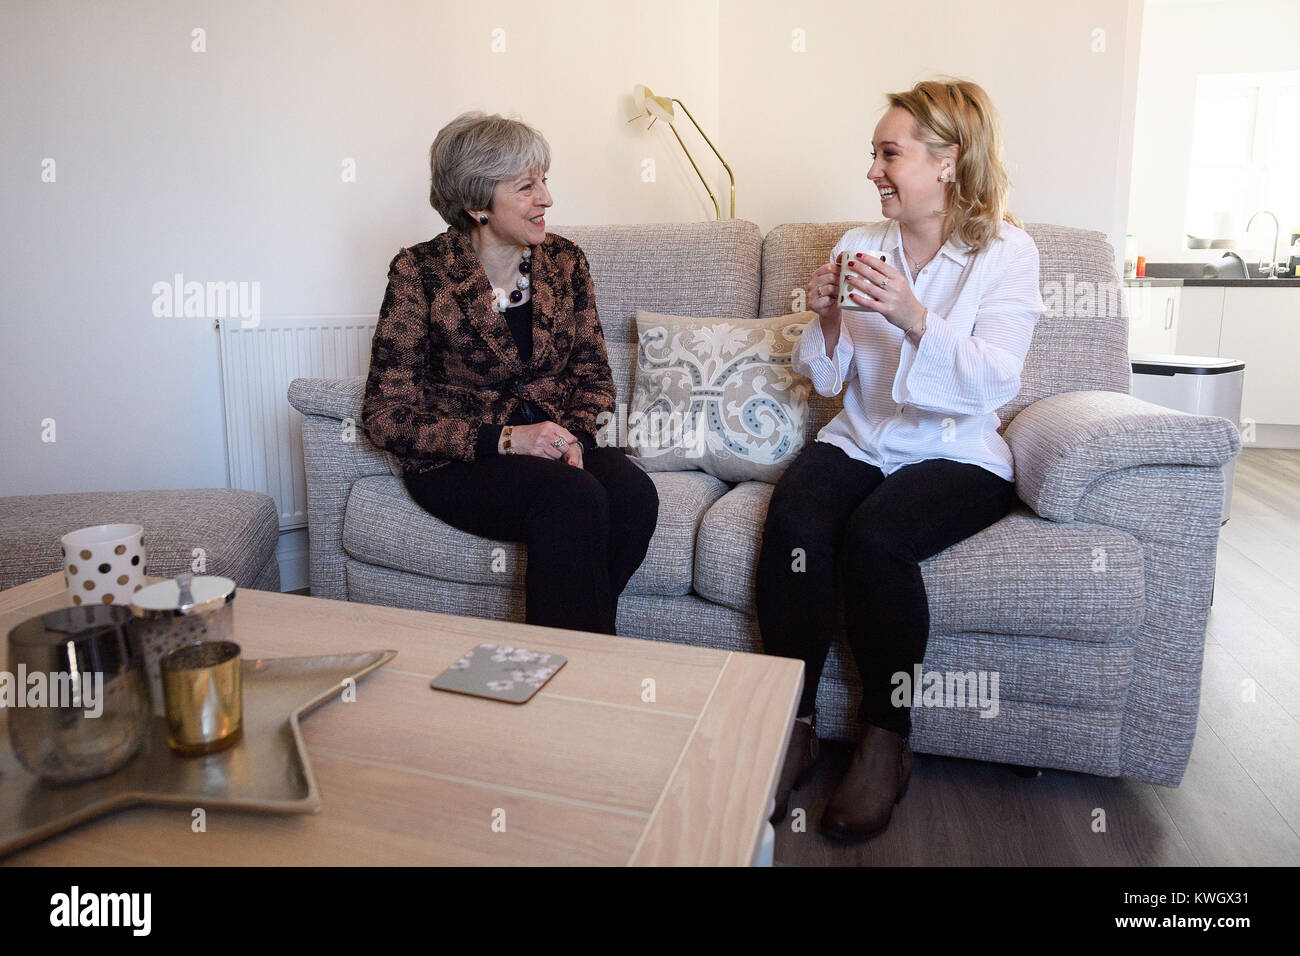 Prime Minister Theresa May (left) chats with first-time buyer Laura Paine during a visit to new housing development Montague Park in Wokingham, Berkshire. Stock Photo